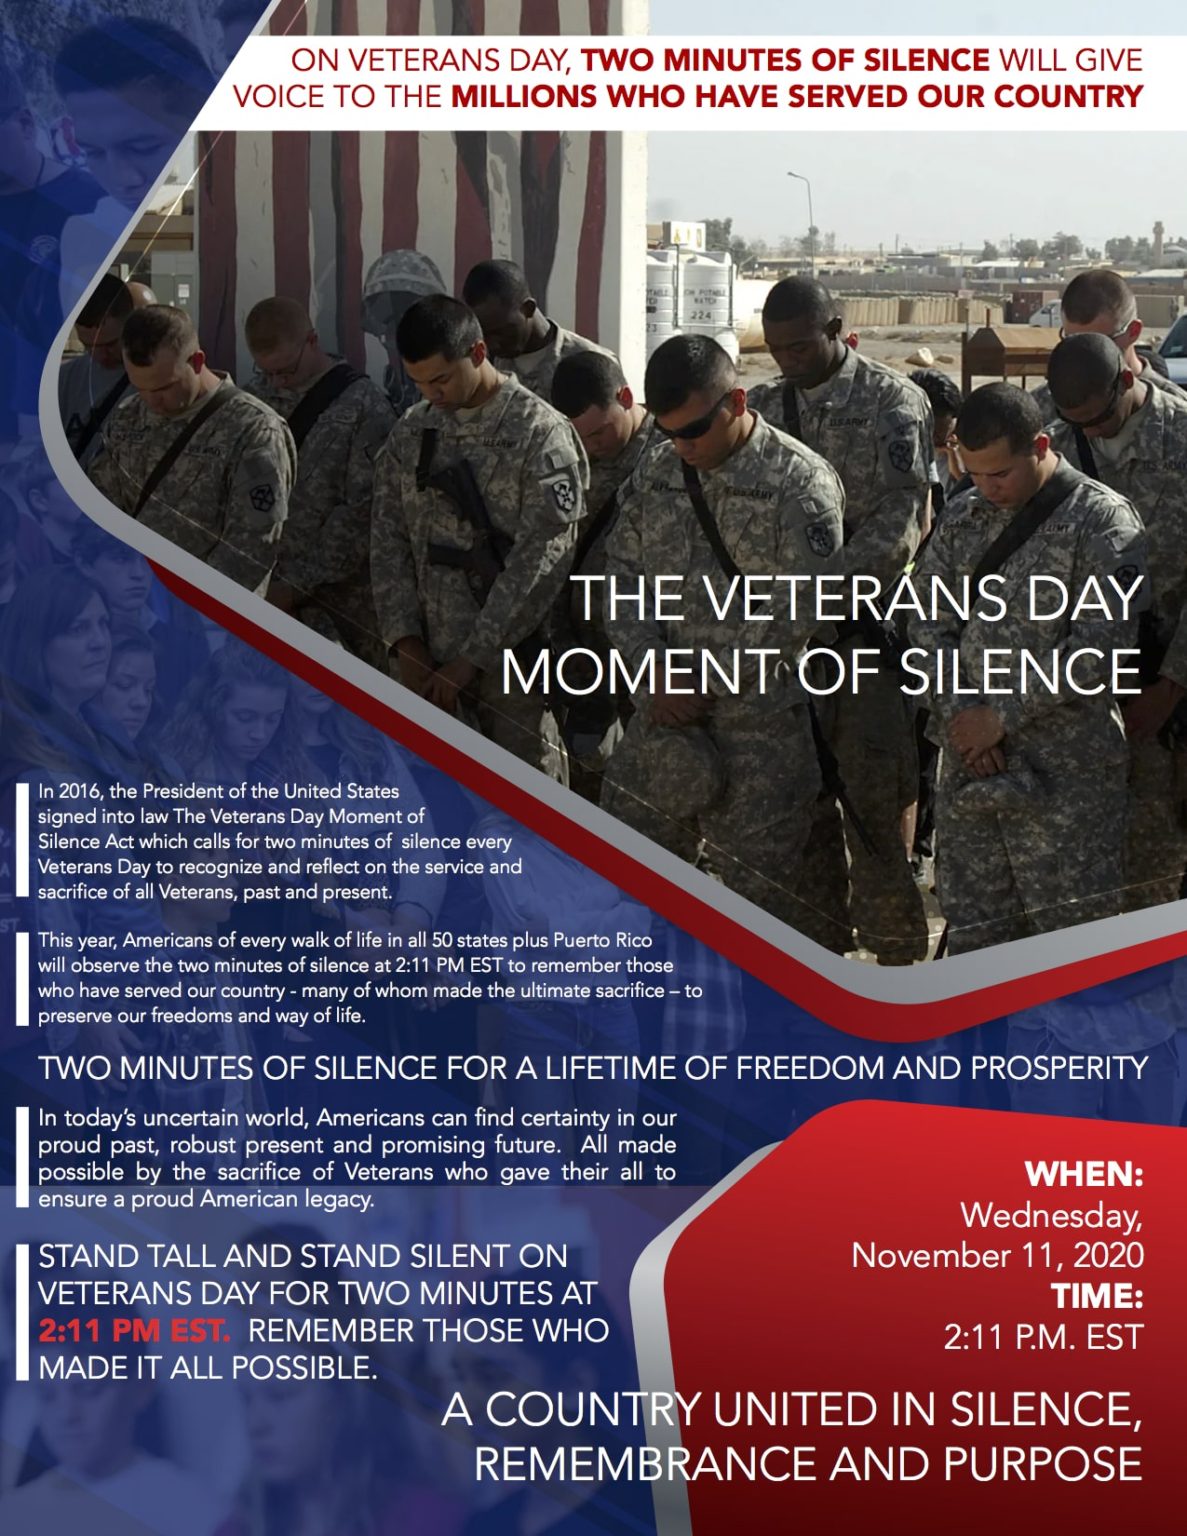 Information Veterans Day Moment of Silence